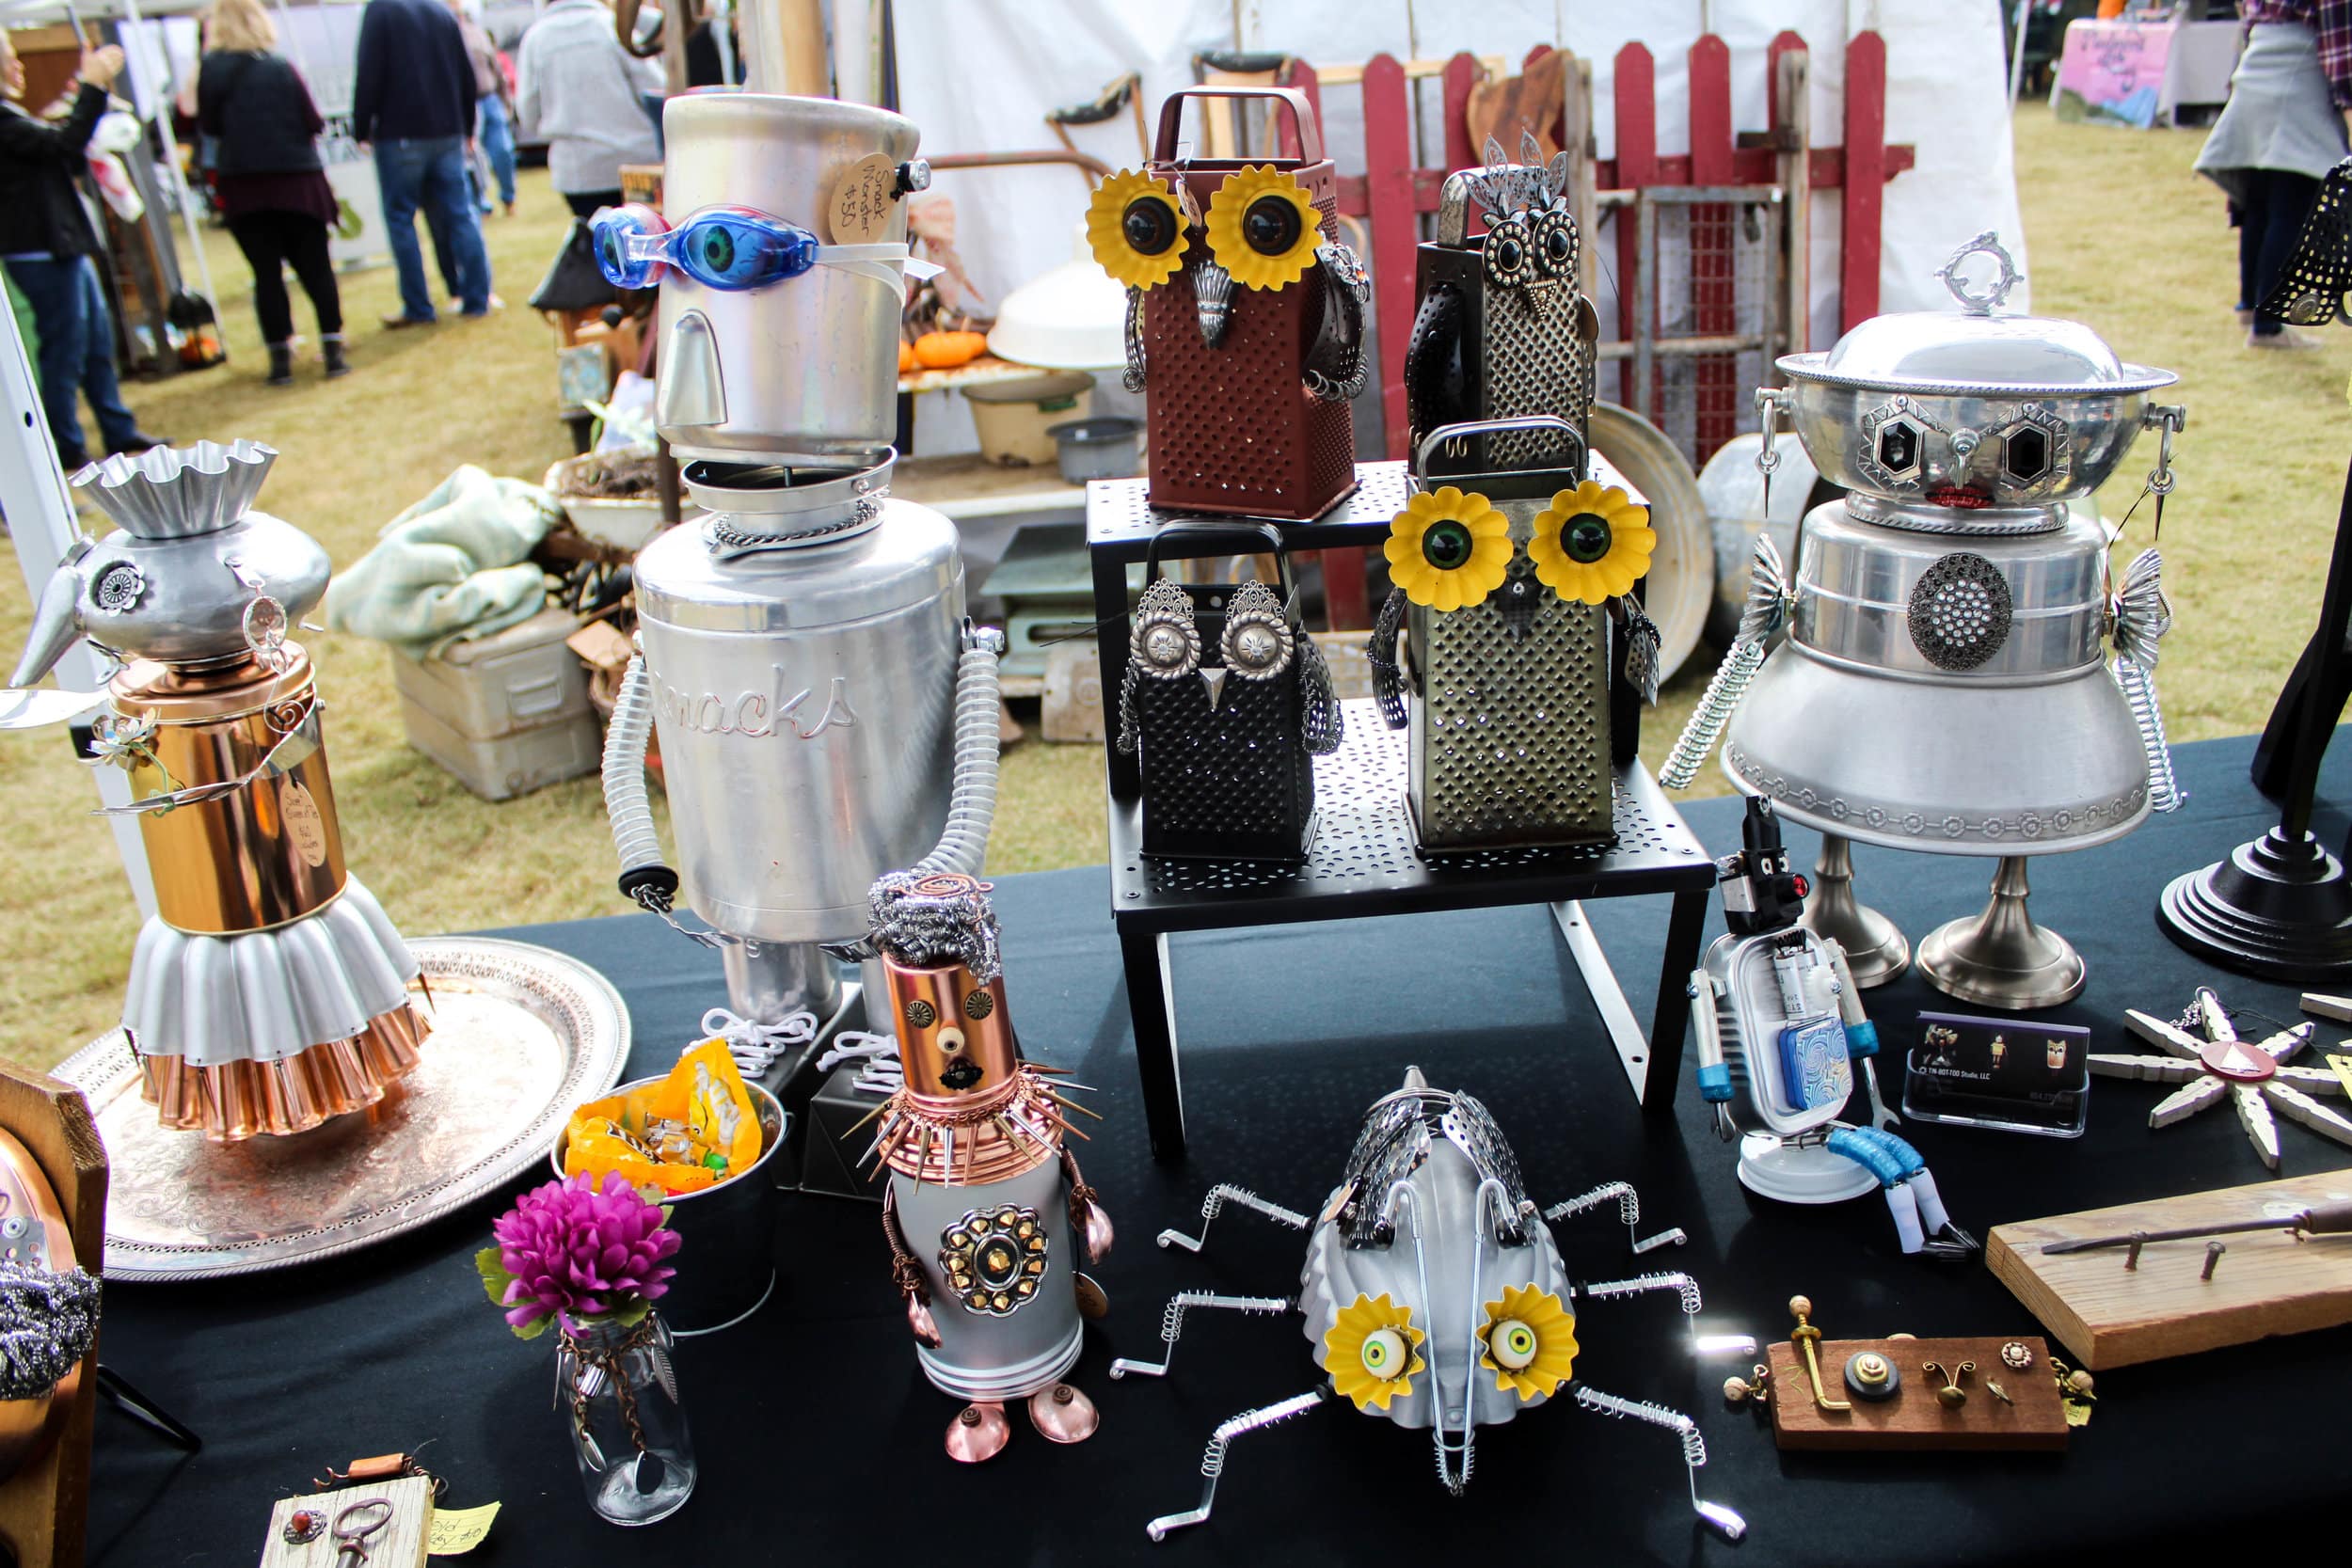 Helen Fields, owner and artist of TIN-BOT-TOO, brought many of her art pieces to sell at the market.